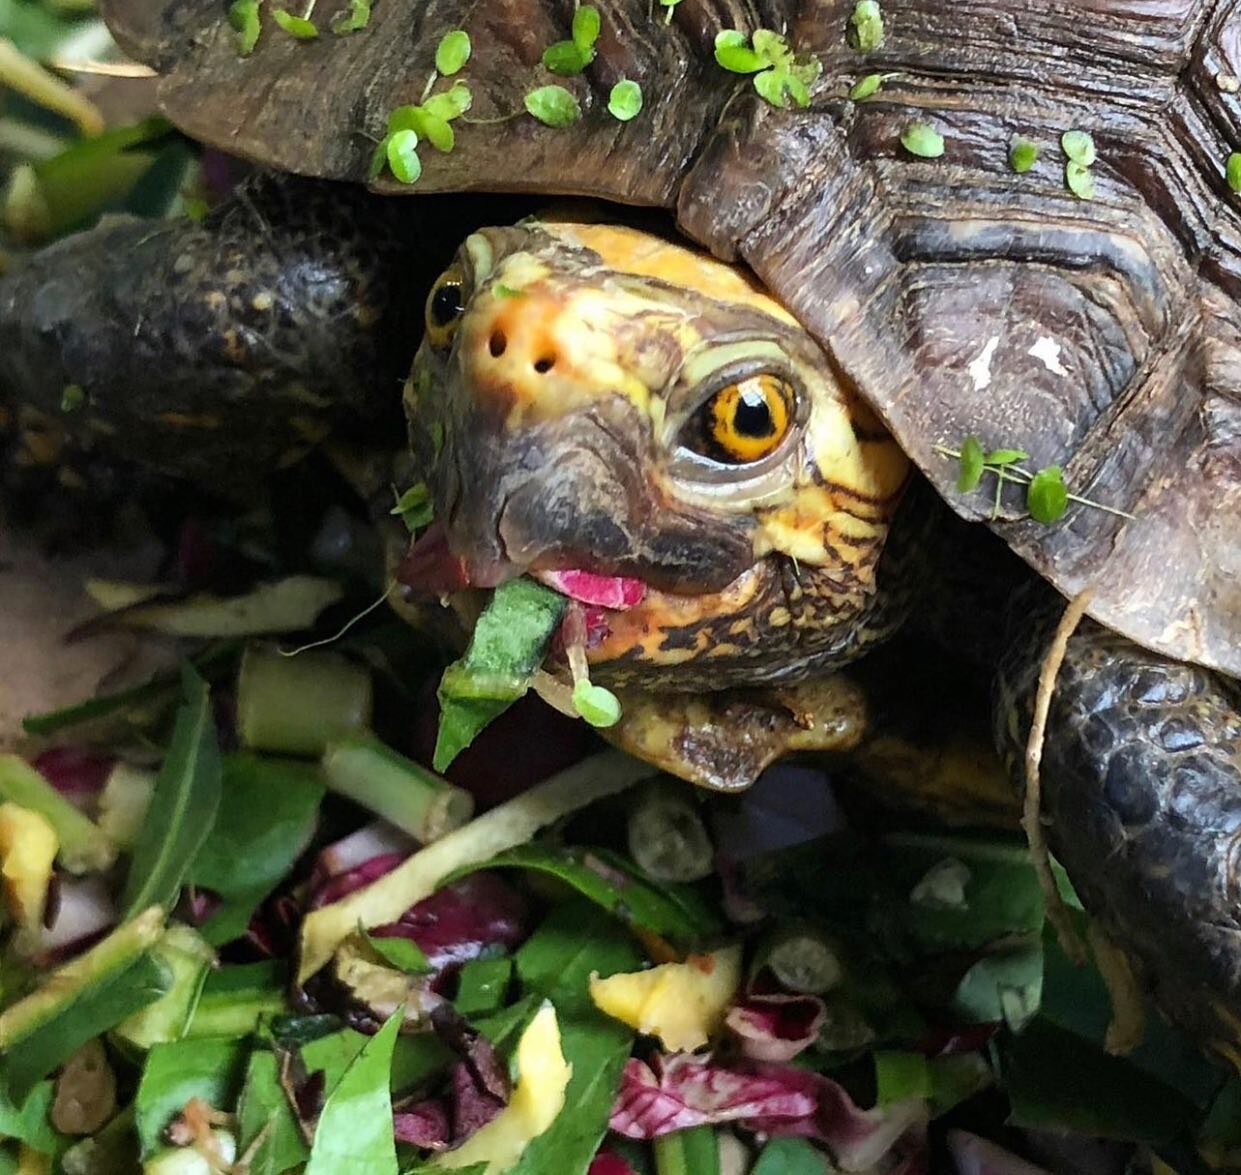 Happy #Saturday! We hope you enjoy your weekend as much as this happy-looking Mexican Wood Turtle (Rhinoclemmys rubida) is enjoying his salad! #turtleconservancy